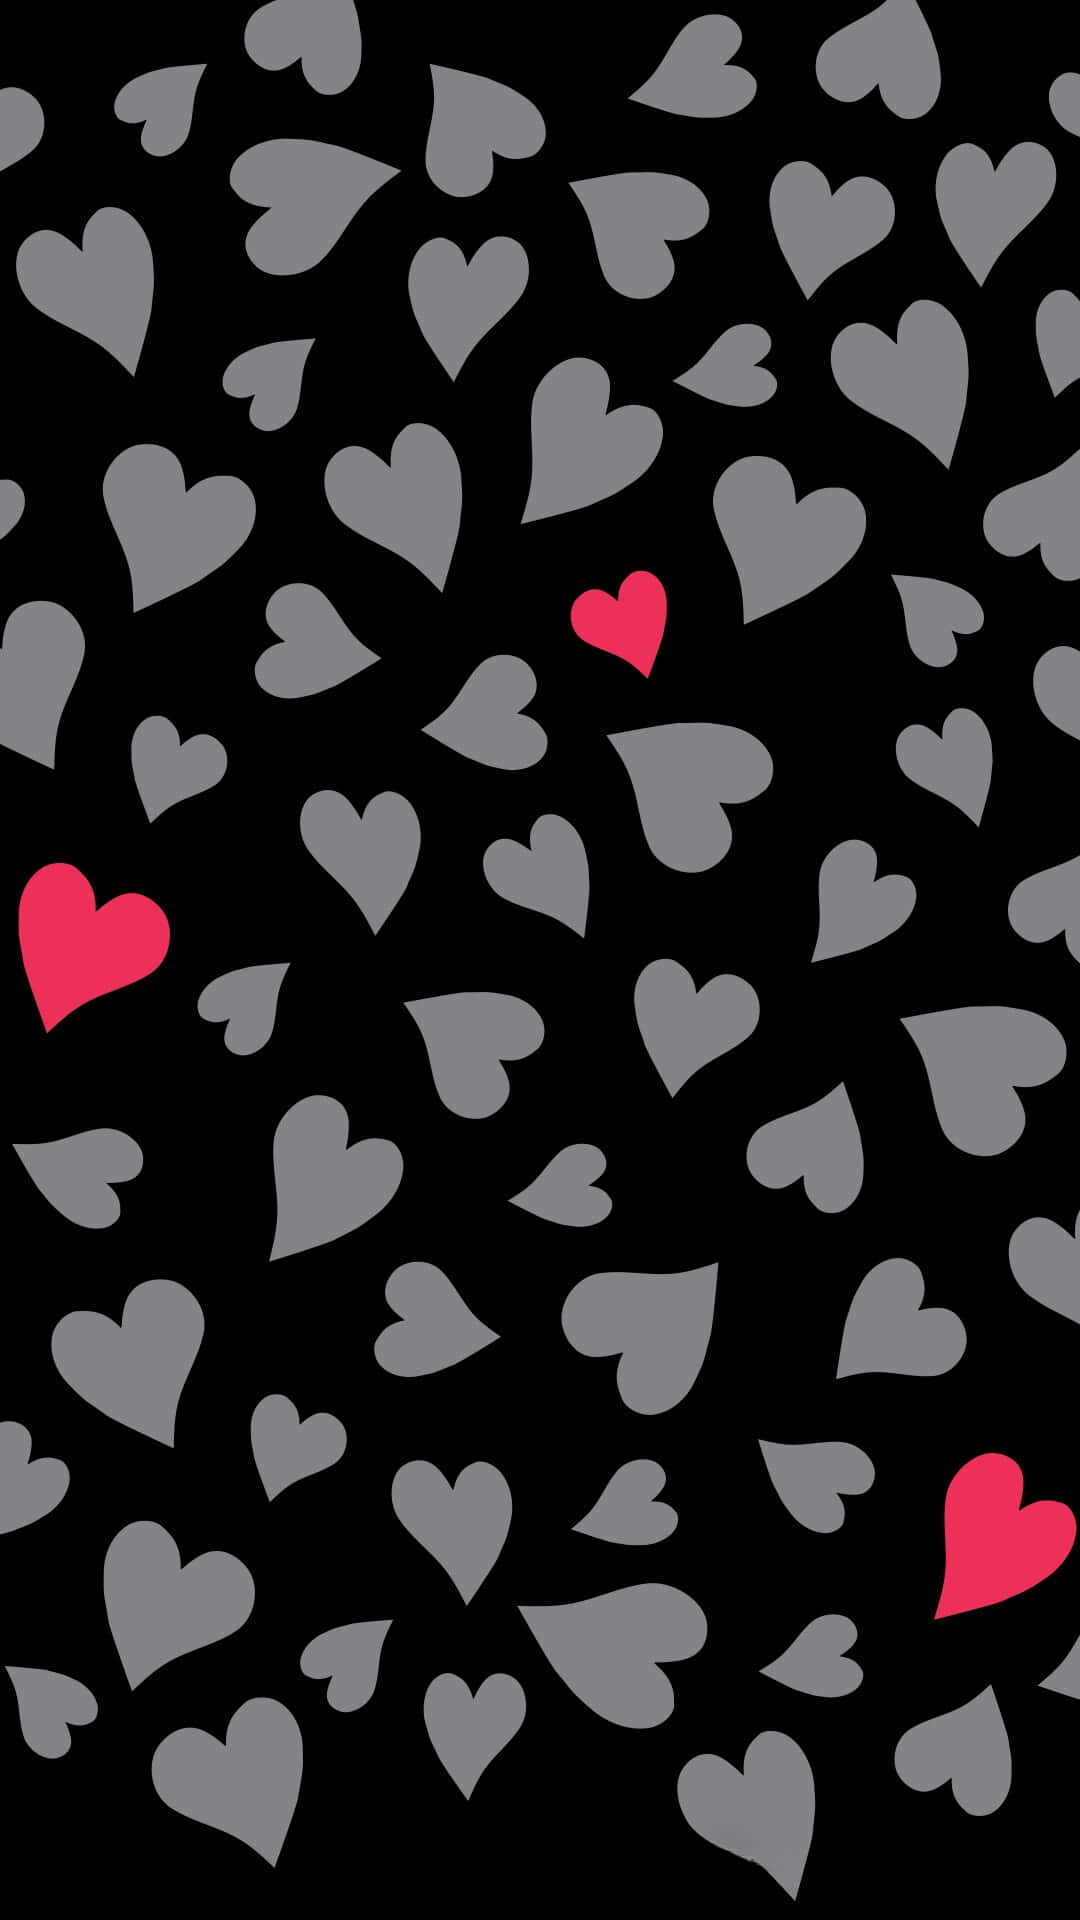 A Collection of Adorable Heart Shapes Wallpaper